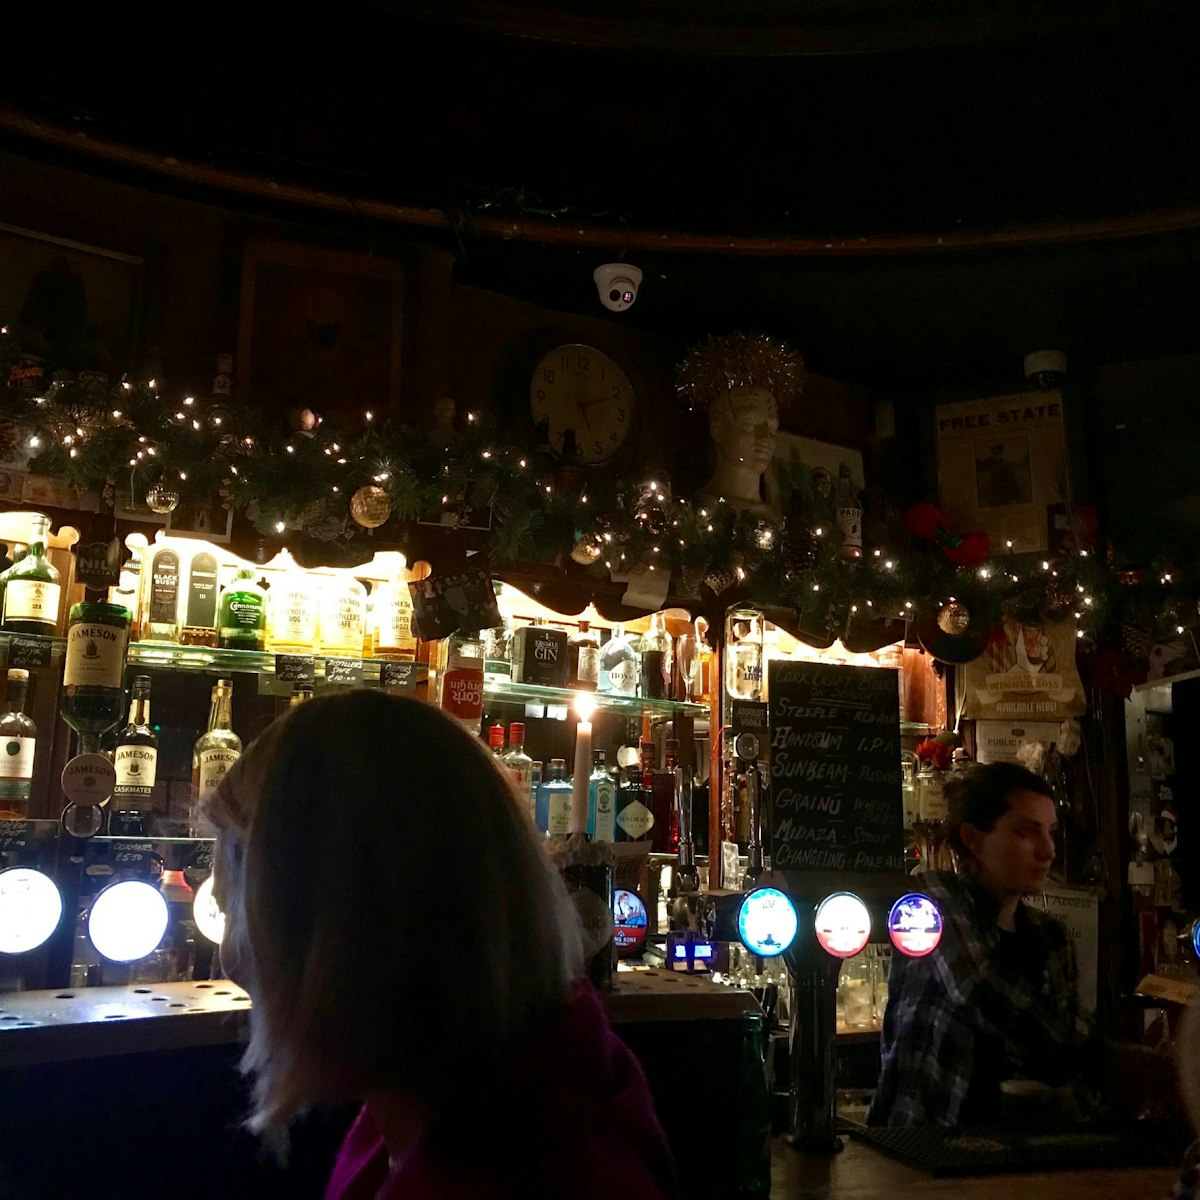 The dark and cosy Oval bar.